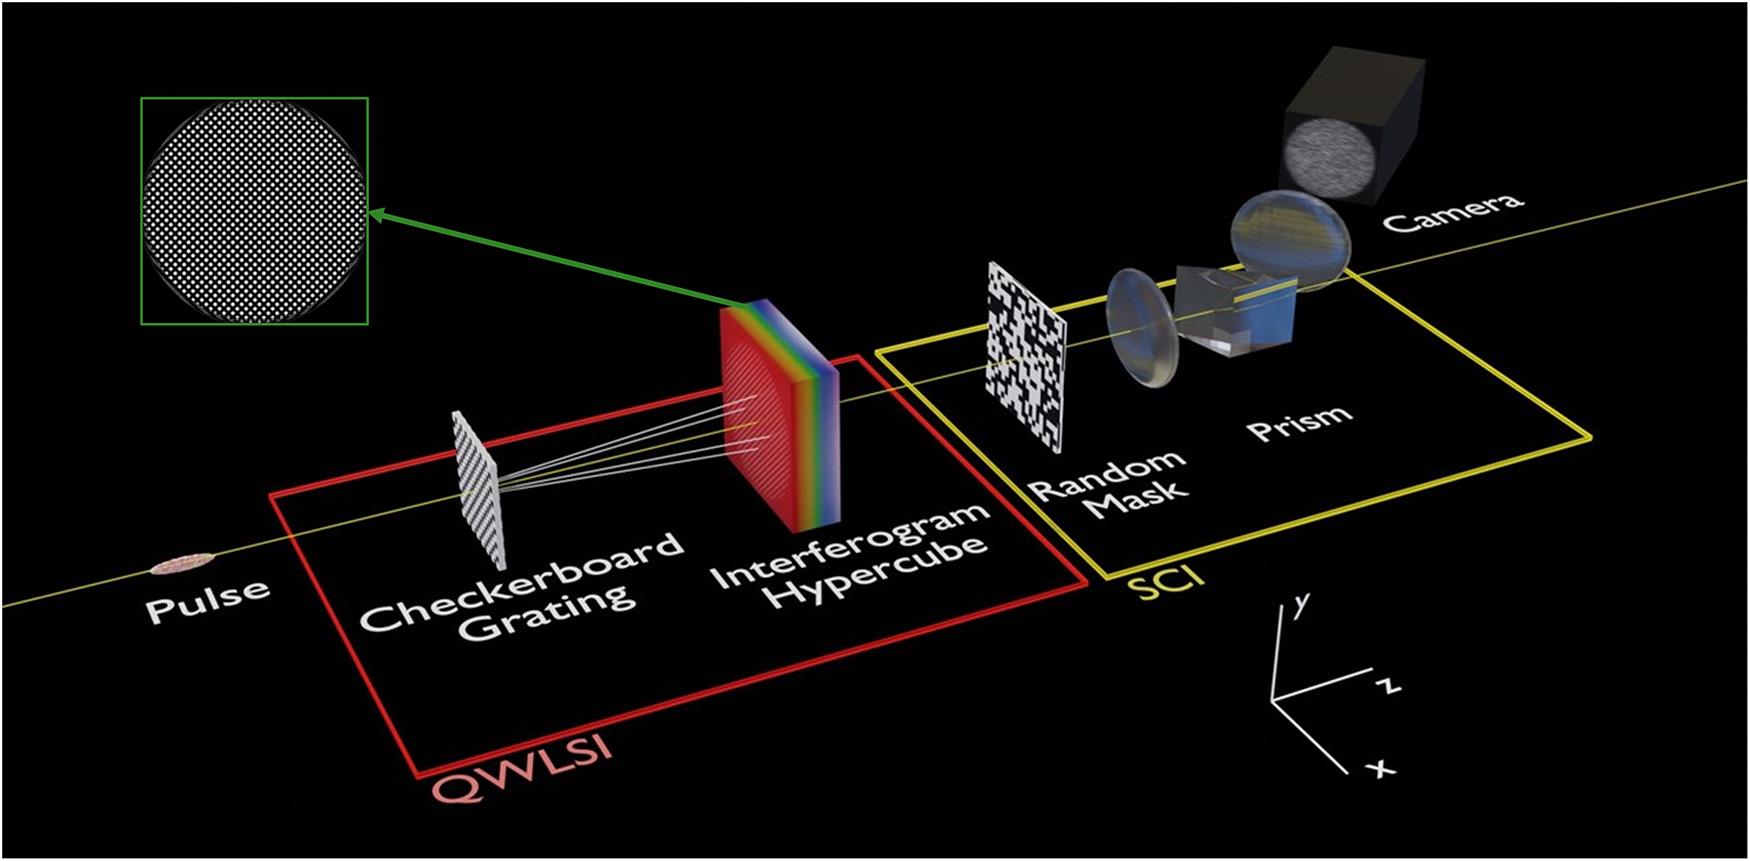 Schematic of the experimental setup that was simulated. The pulse first travels through a quadriwave lateral shearing interferometer, yielding a hypercube of interferograms, a slice of which is shown in the green box. The hypercube is then passed through a CASSI setup. This consists of a random mask and a relay system encompassing a prism, before the coded shot is captured with the camera. This diagram is not to scale.